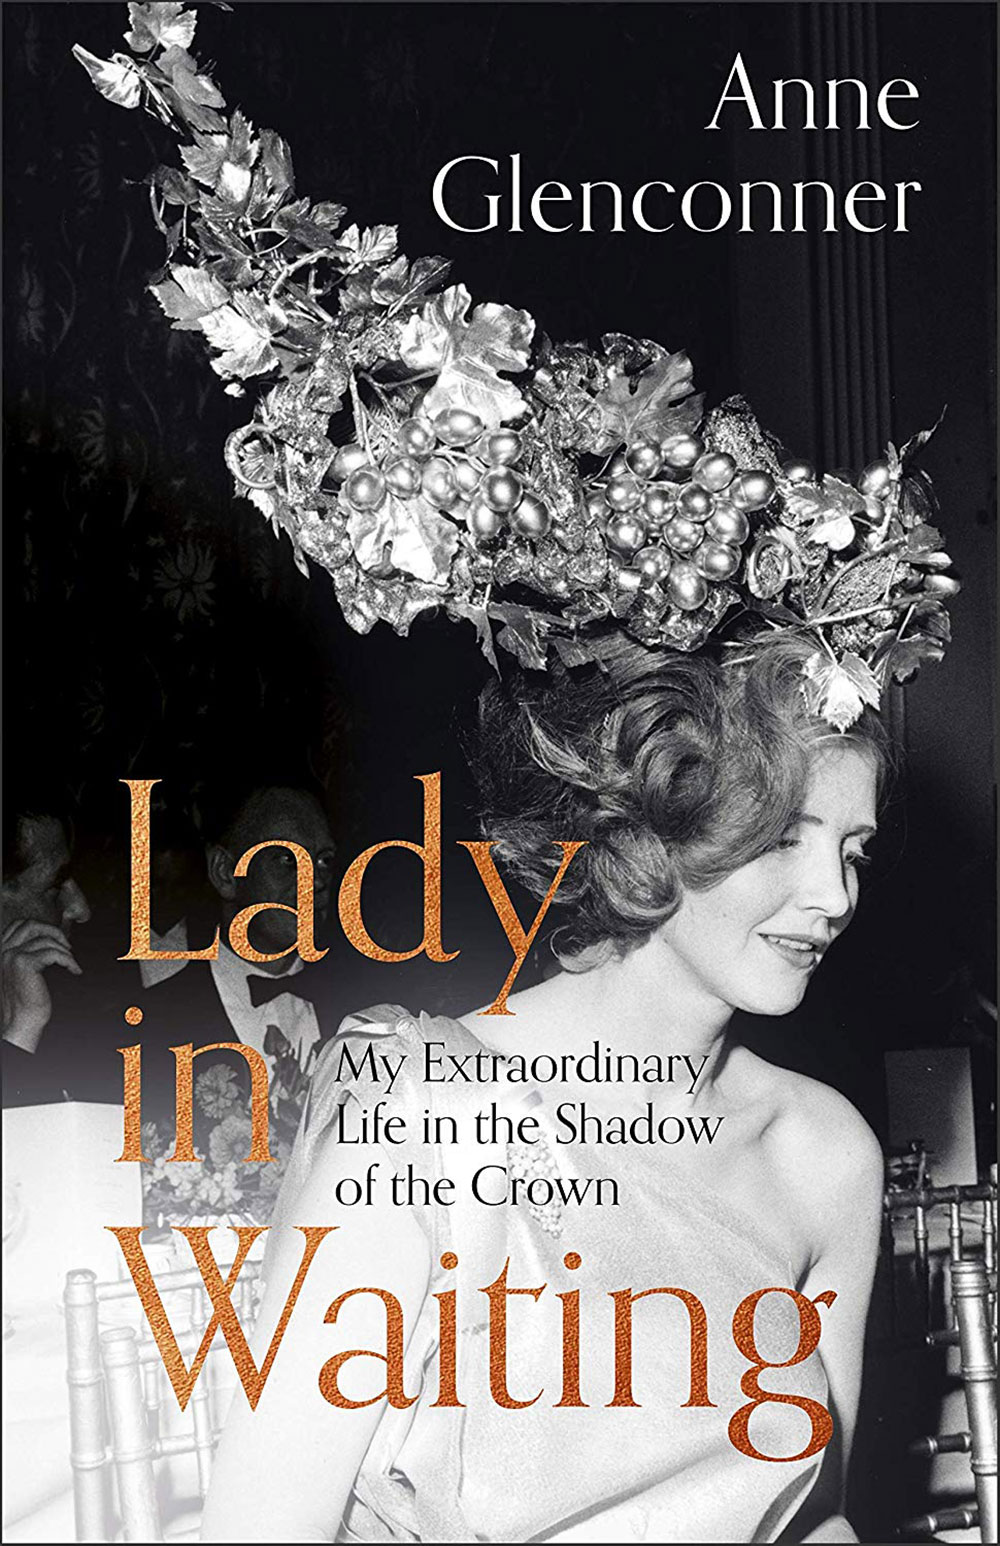 A Lady in Waiting: My Extraordinary Life in the Shadow of the Crown by Anne Glenconner